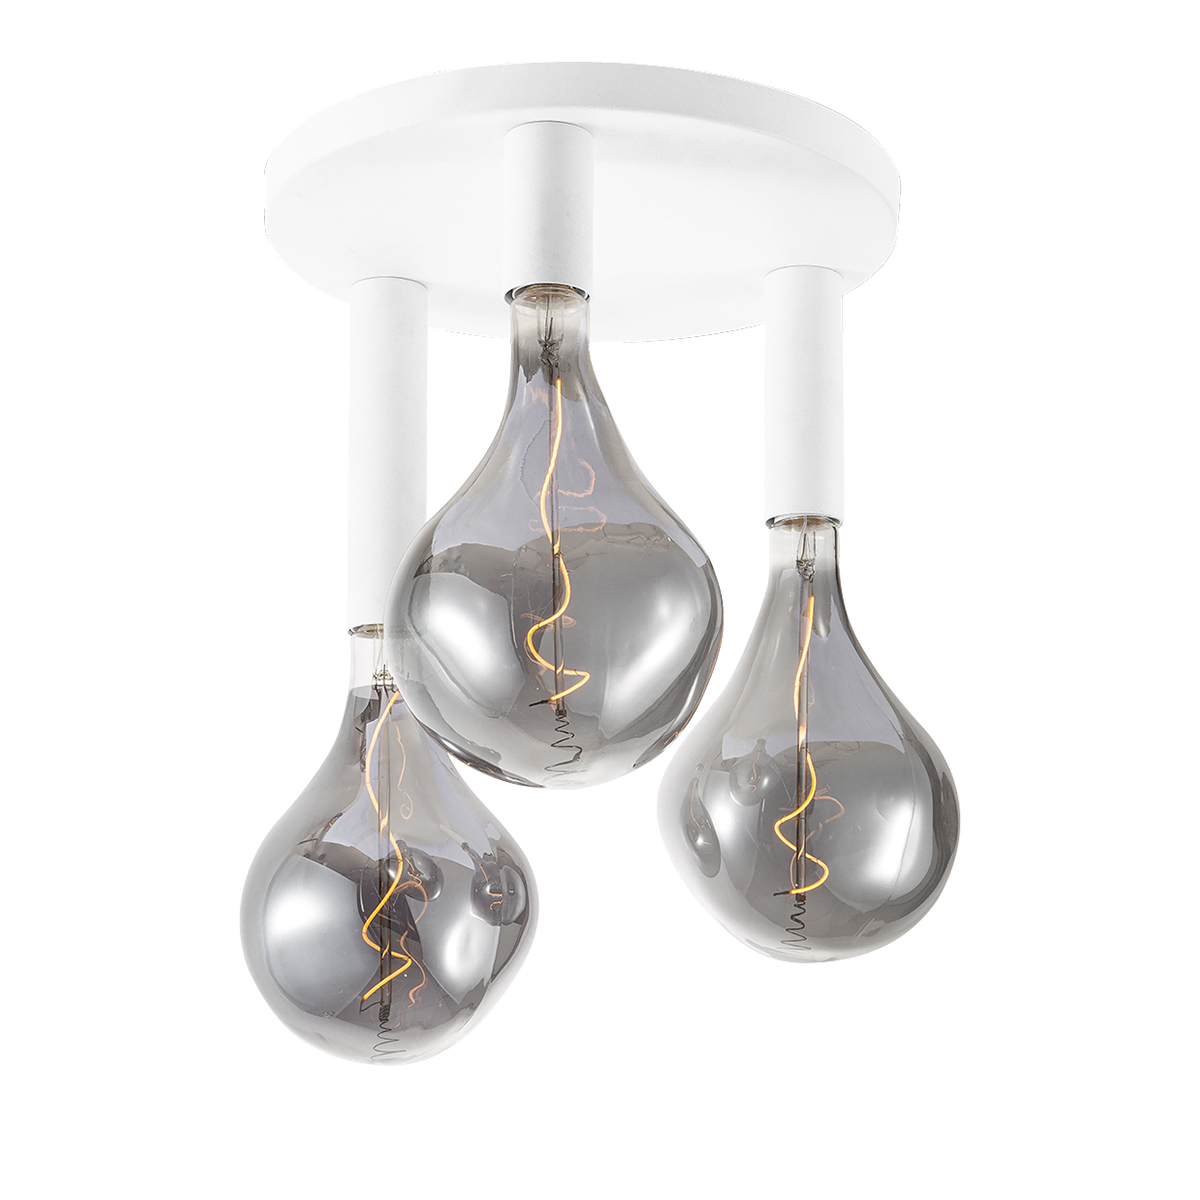 Tangla lighting - TLC5001-03SW - LED ceiling lamp 3 Lights - metal in sand white - drop - round - E27